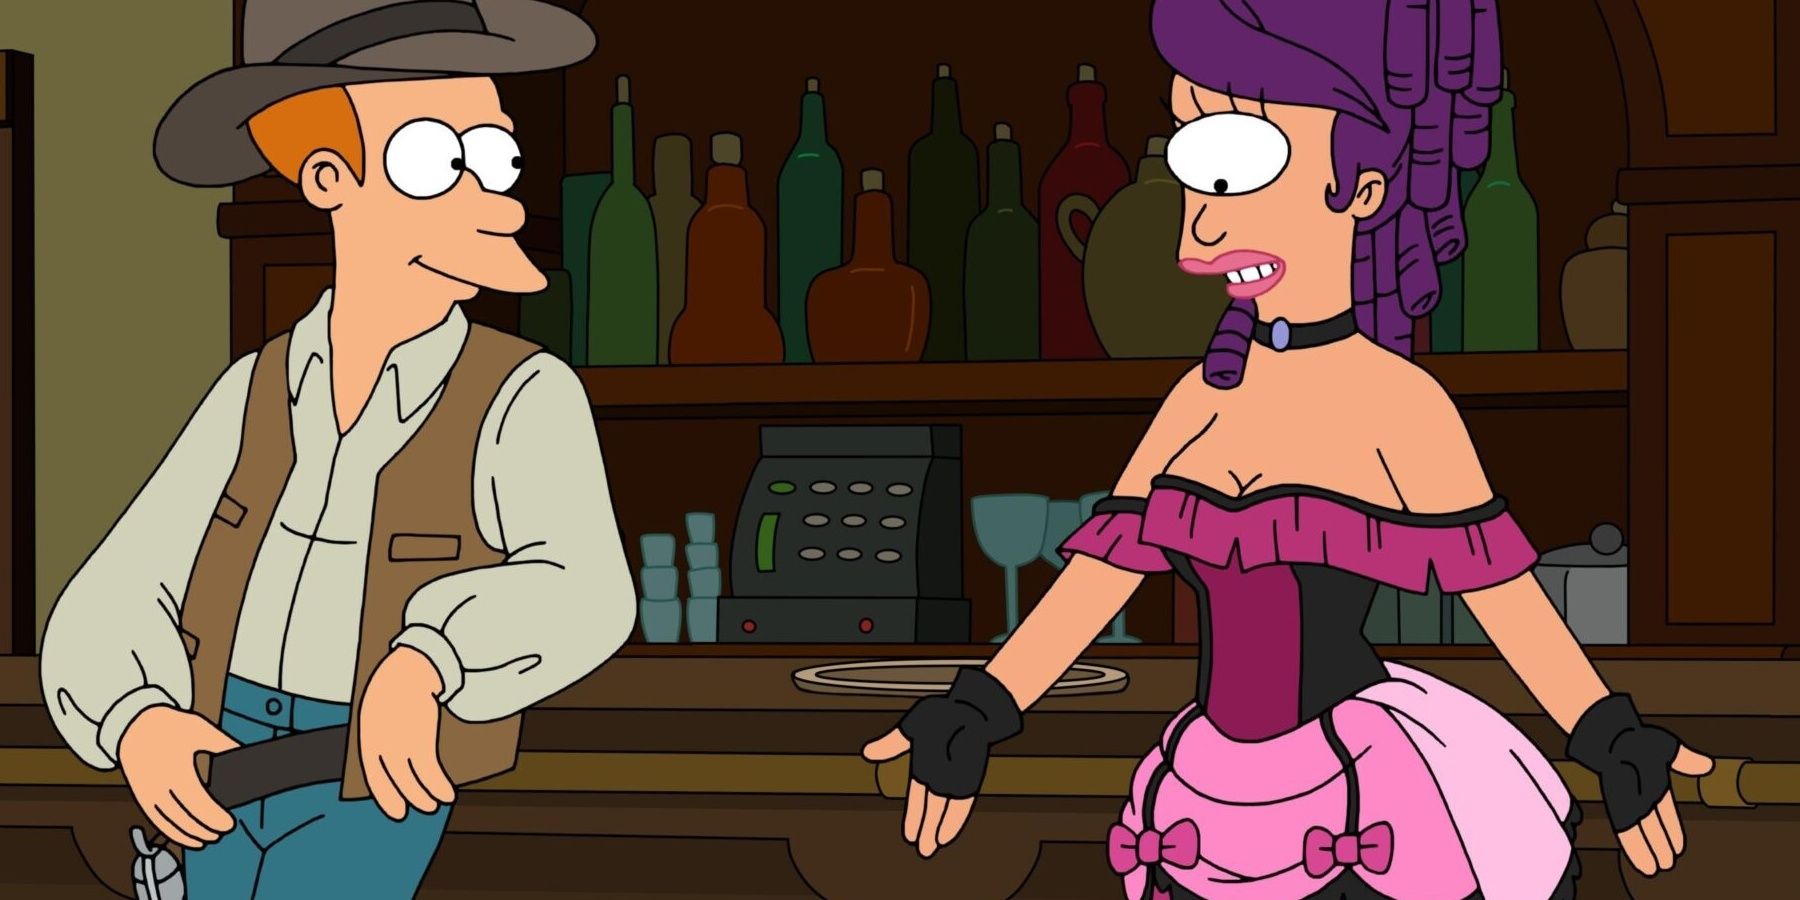 Fry and Leela in a Wild West brothel